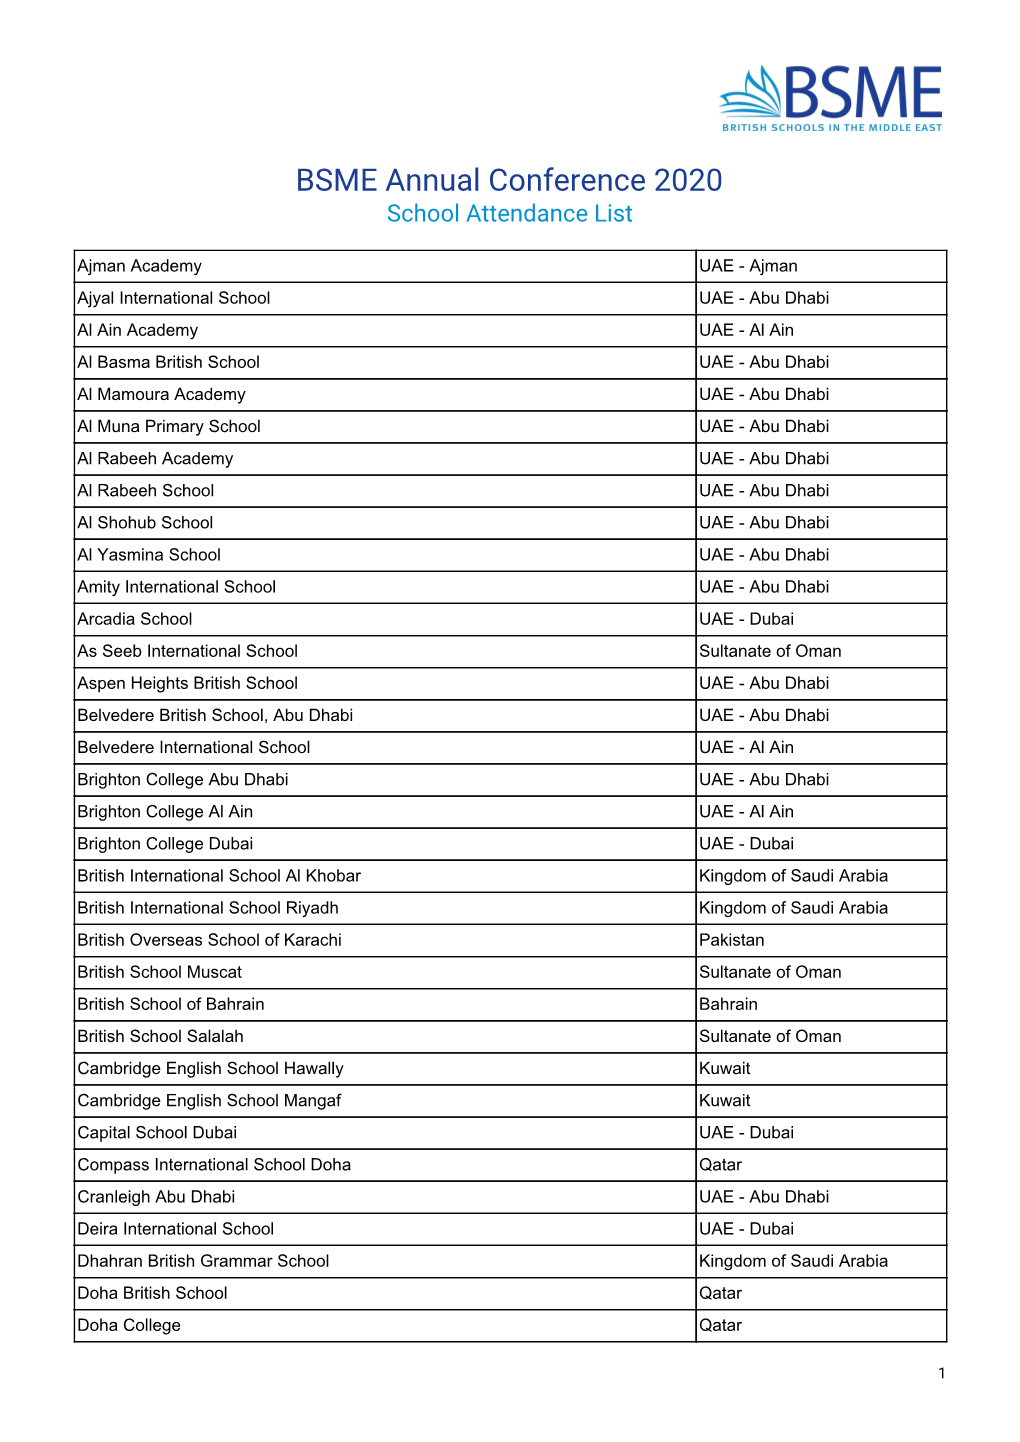 BSME Annual Conference 2020 School Attendance List